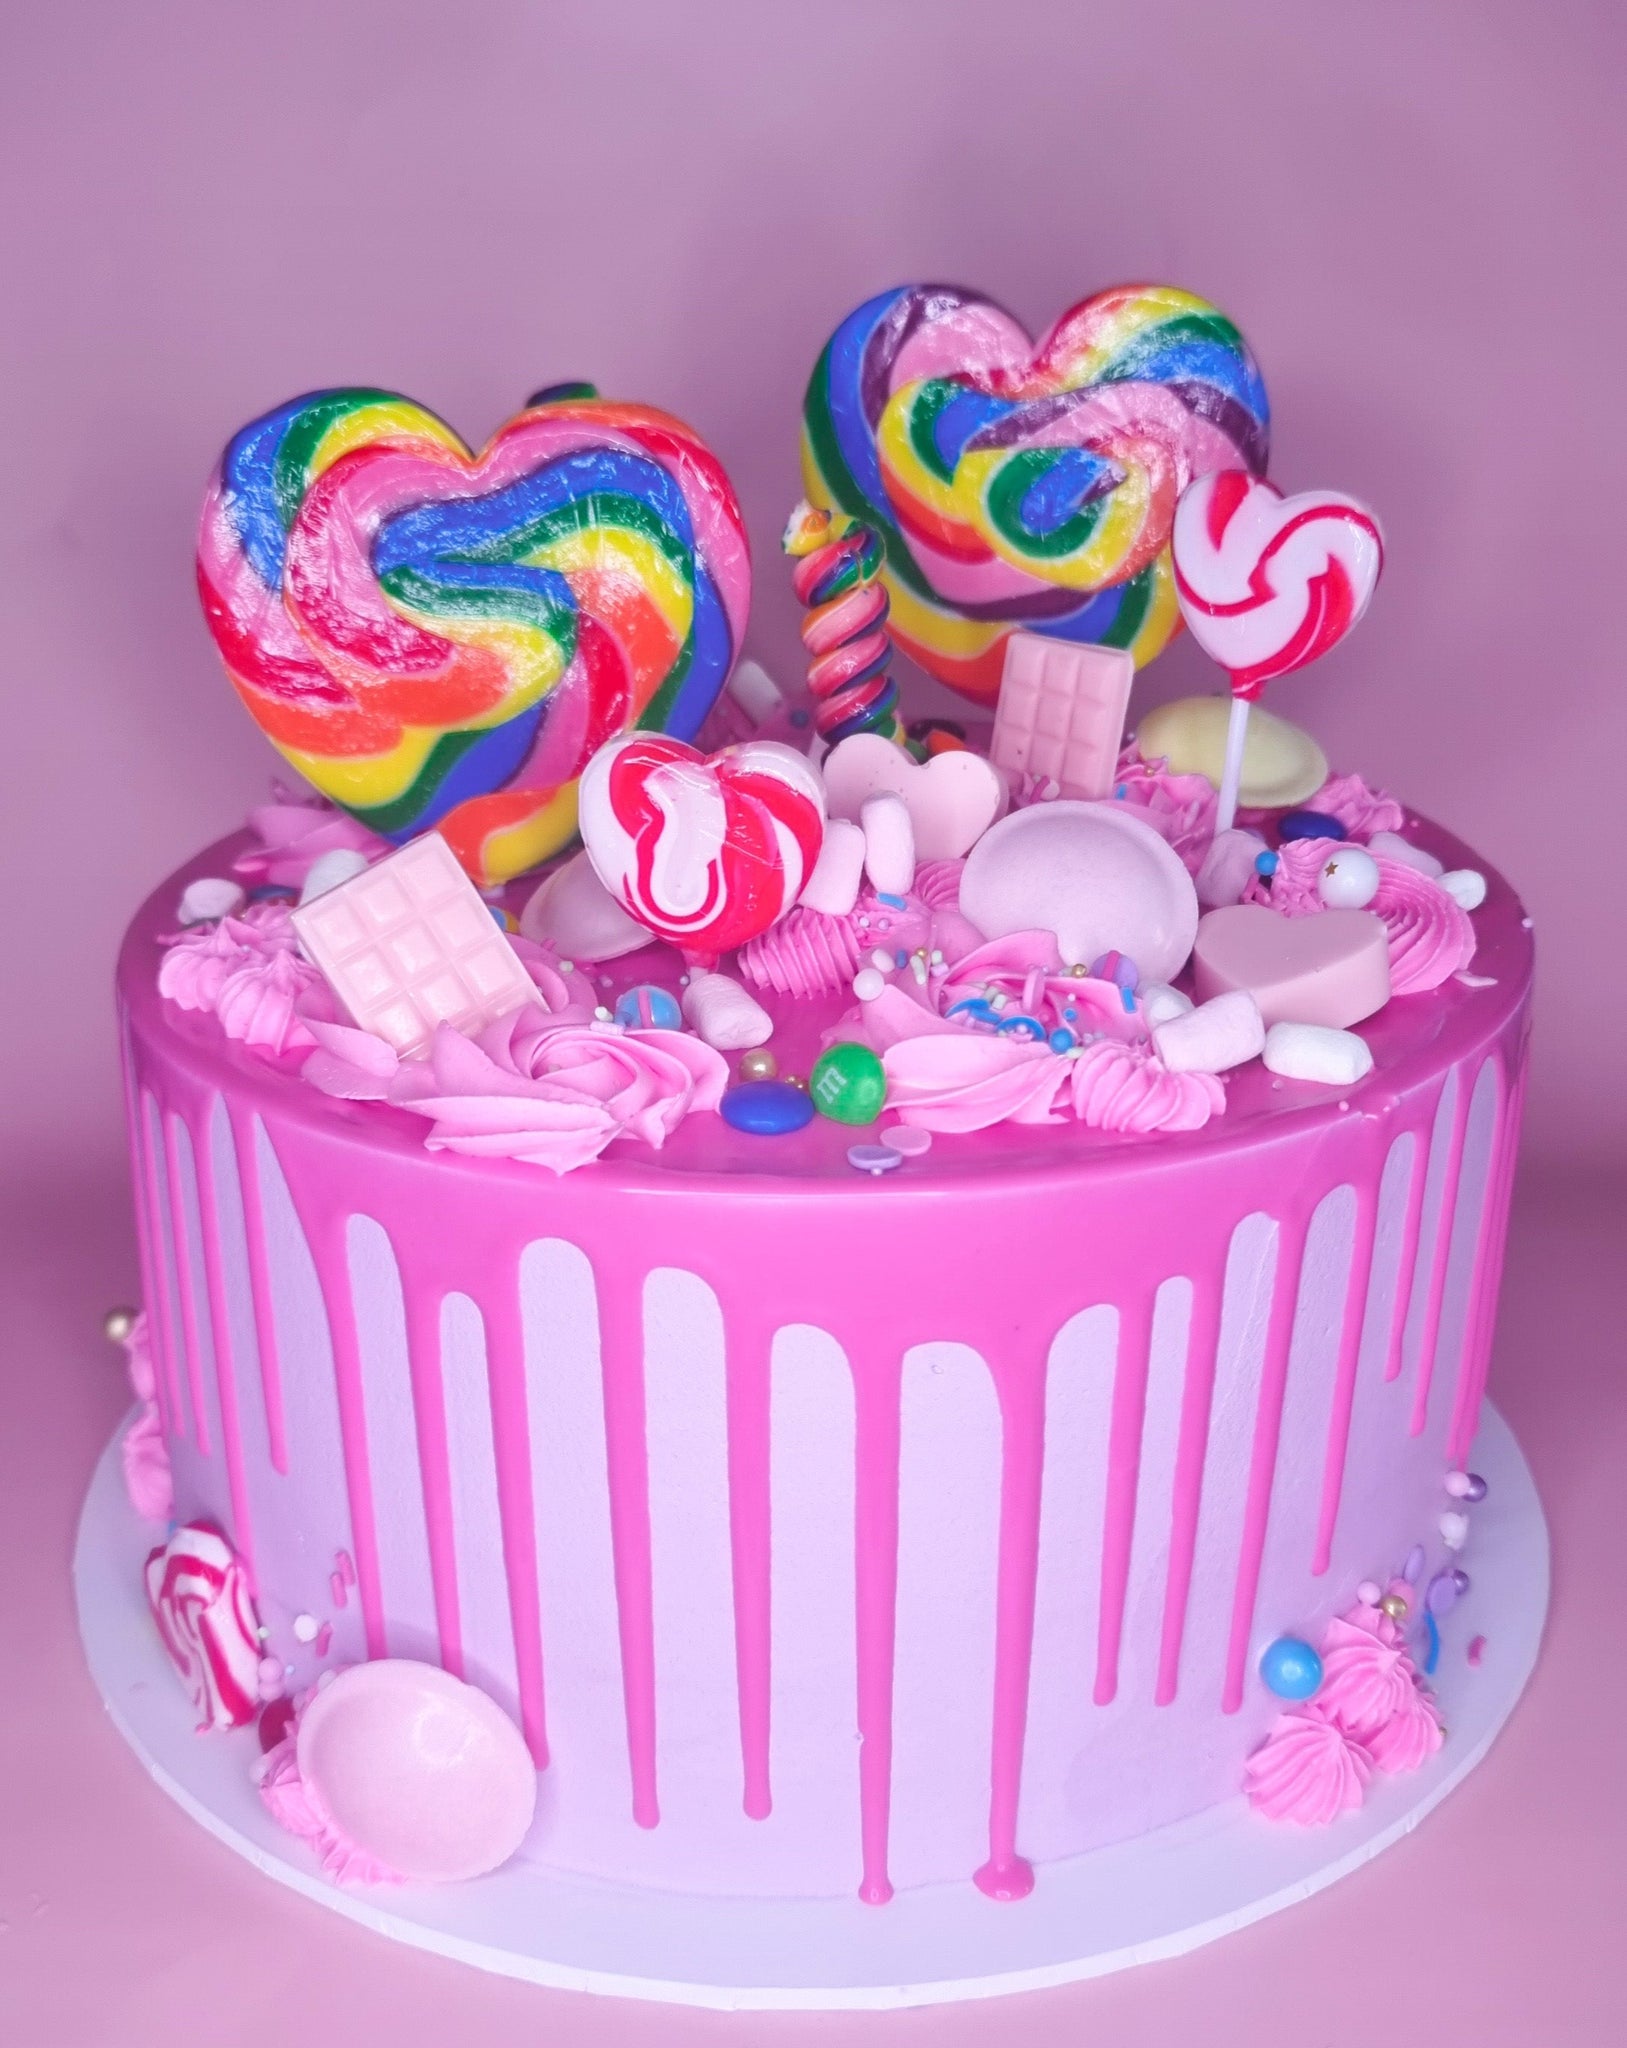 Candy Land Cake | Daughter's 5th birthday cake | sharna11 | Flickr